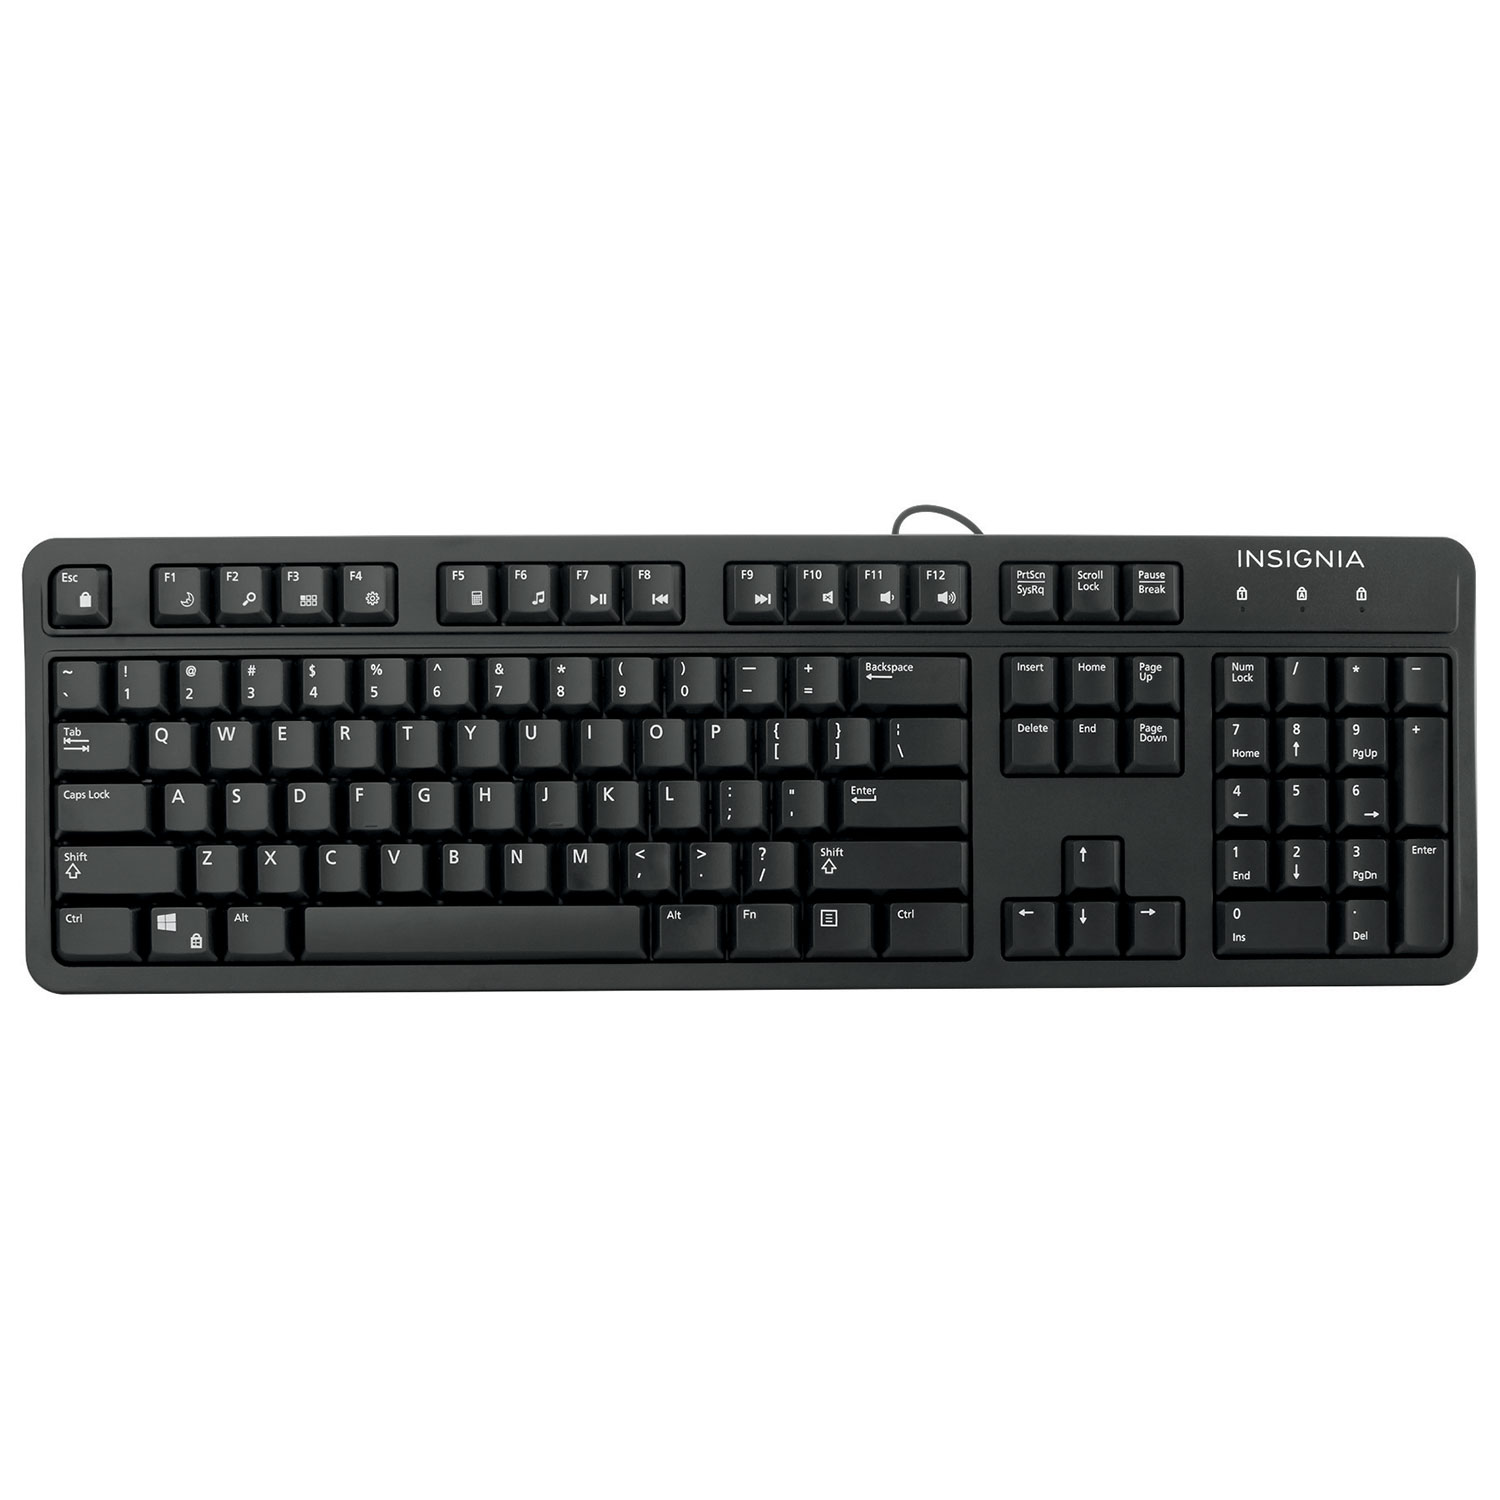 Insignia Wired Keyboard Black English Only At Best Buy Best Buy Canada